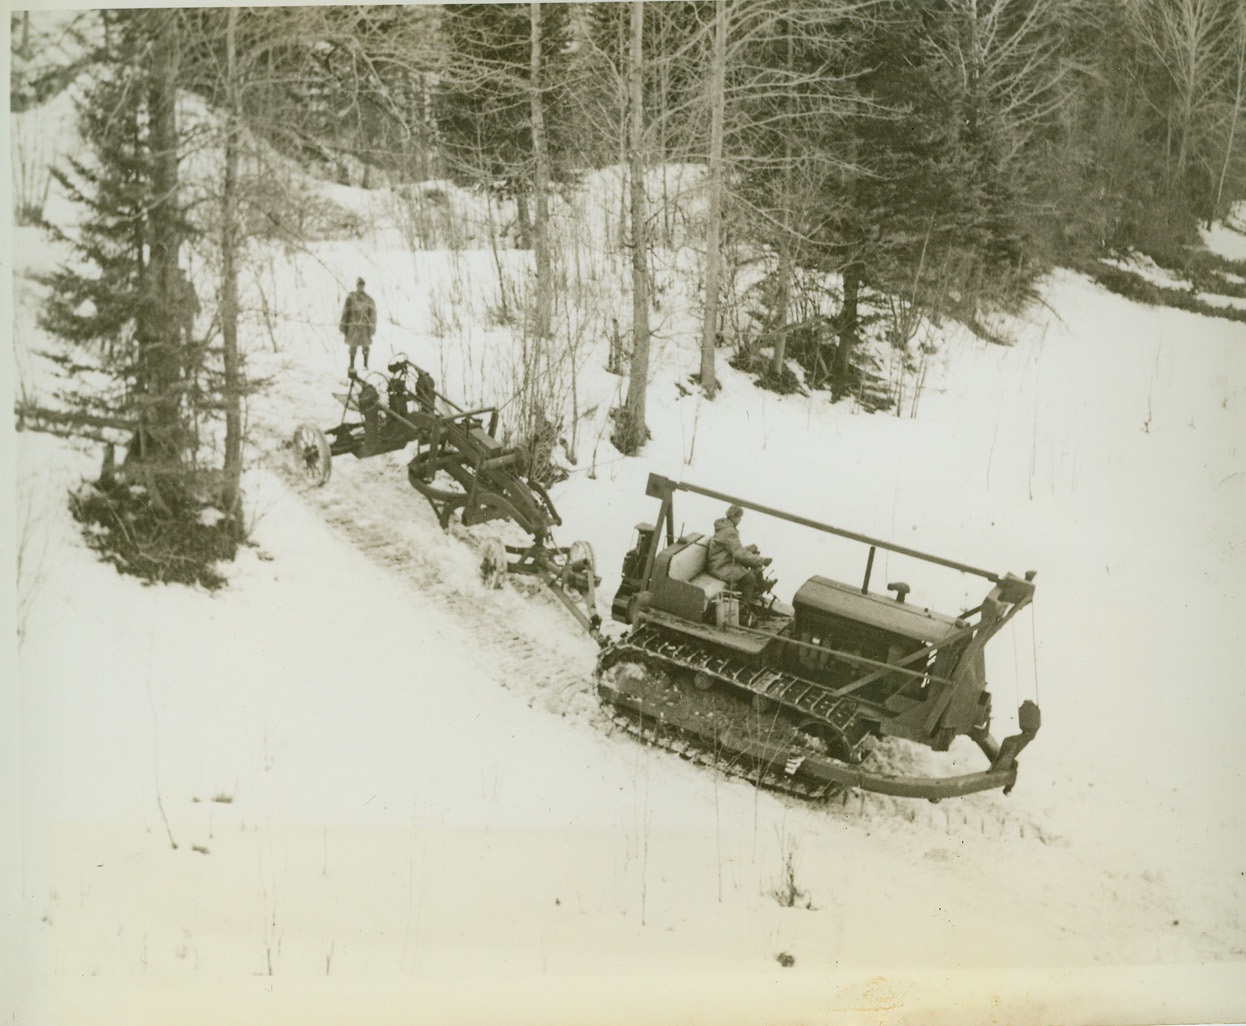 HELPING LAY NEW HIGHWAY TO ALASKA, 4/3/1942. NELSON, B.C.—Highway building equipment bound for an advance point on the new highway from the U.S. to Alaska crosses Cutrank River in isolated British Columbia territory. Credit: OWI Radiophoto from ACME;